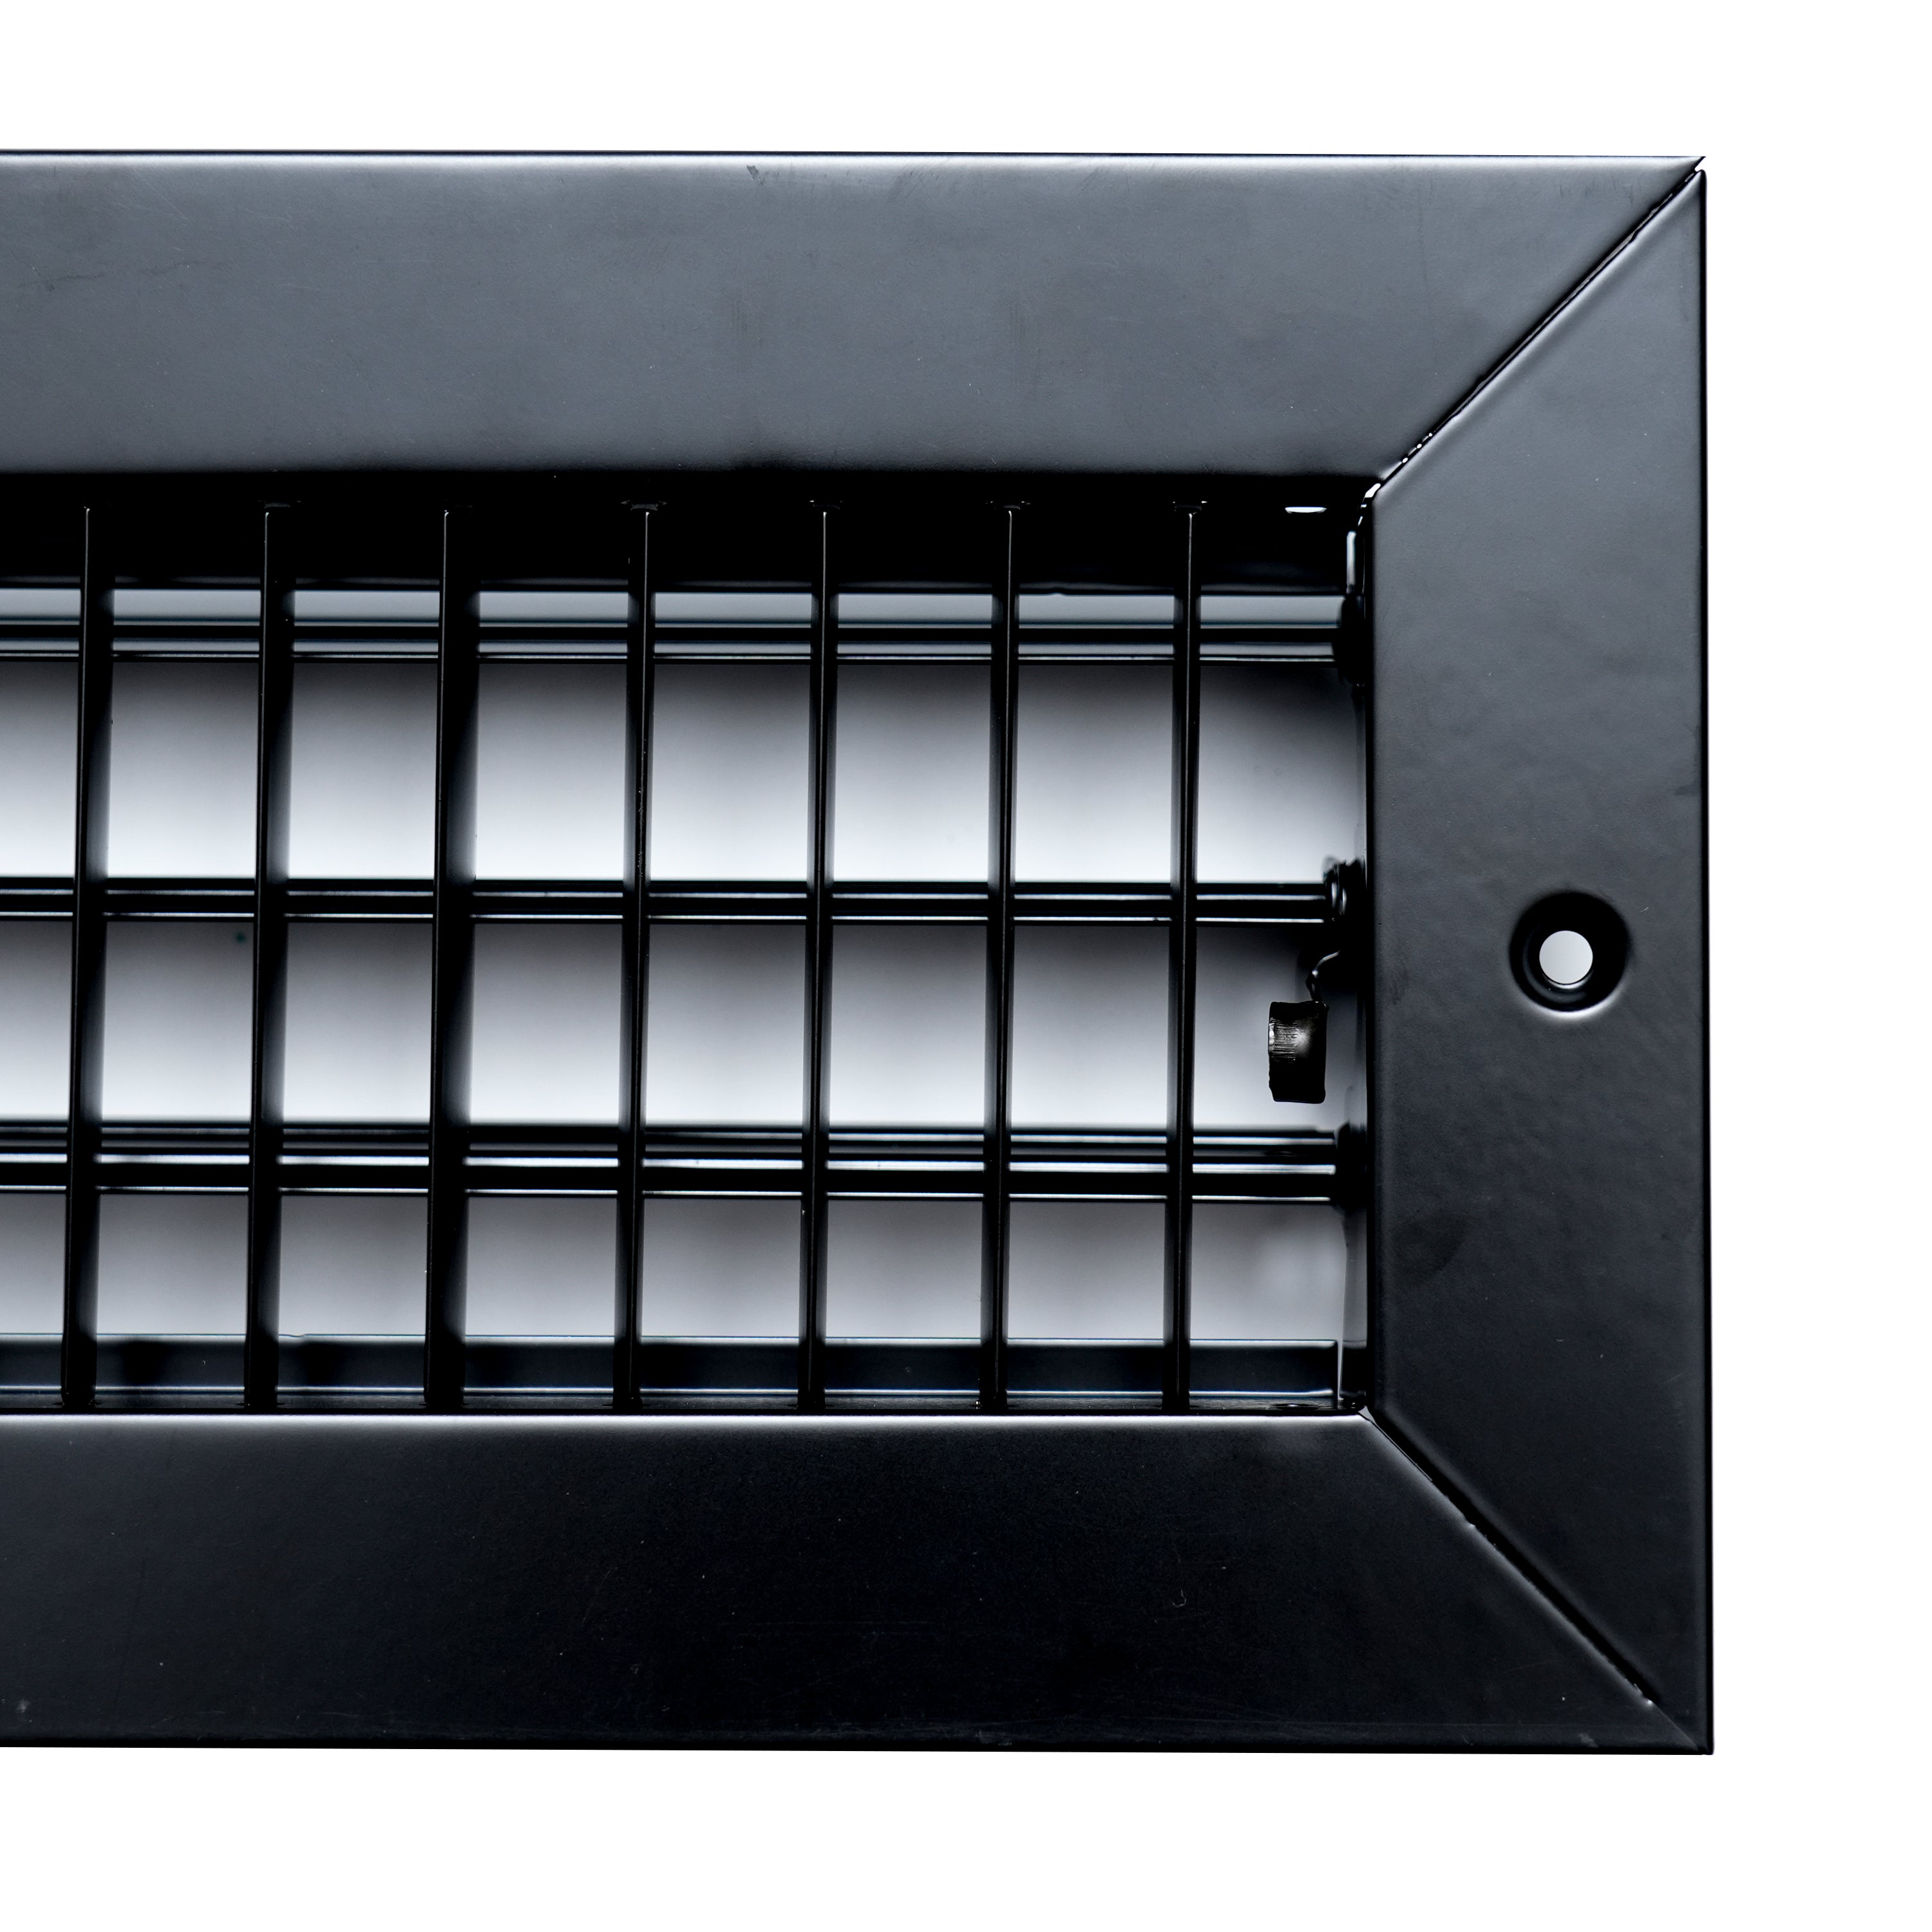 10"W x 6"H  Steel Adjustable Air Supply Grille | Register Vent Cover Grill for Sidewall and Ceiling | Black | Outer Dimensions: 11.75"W X 7.75"H for 10x6 Duct Opening